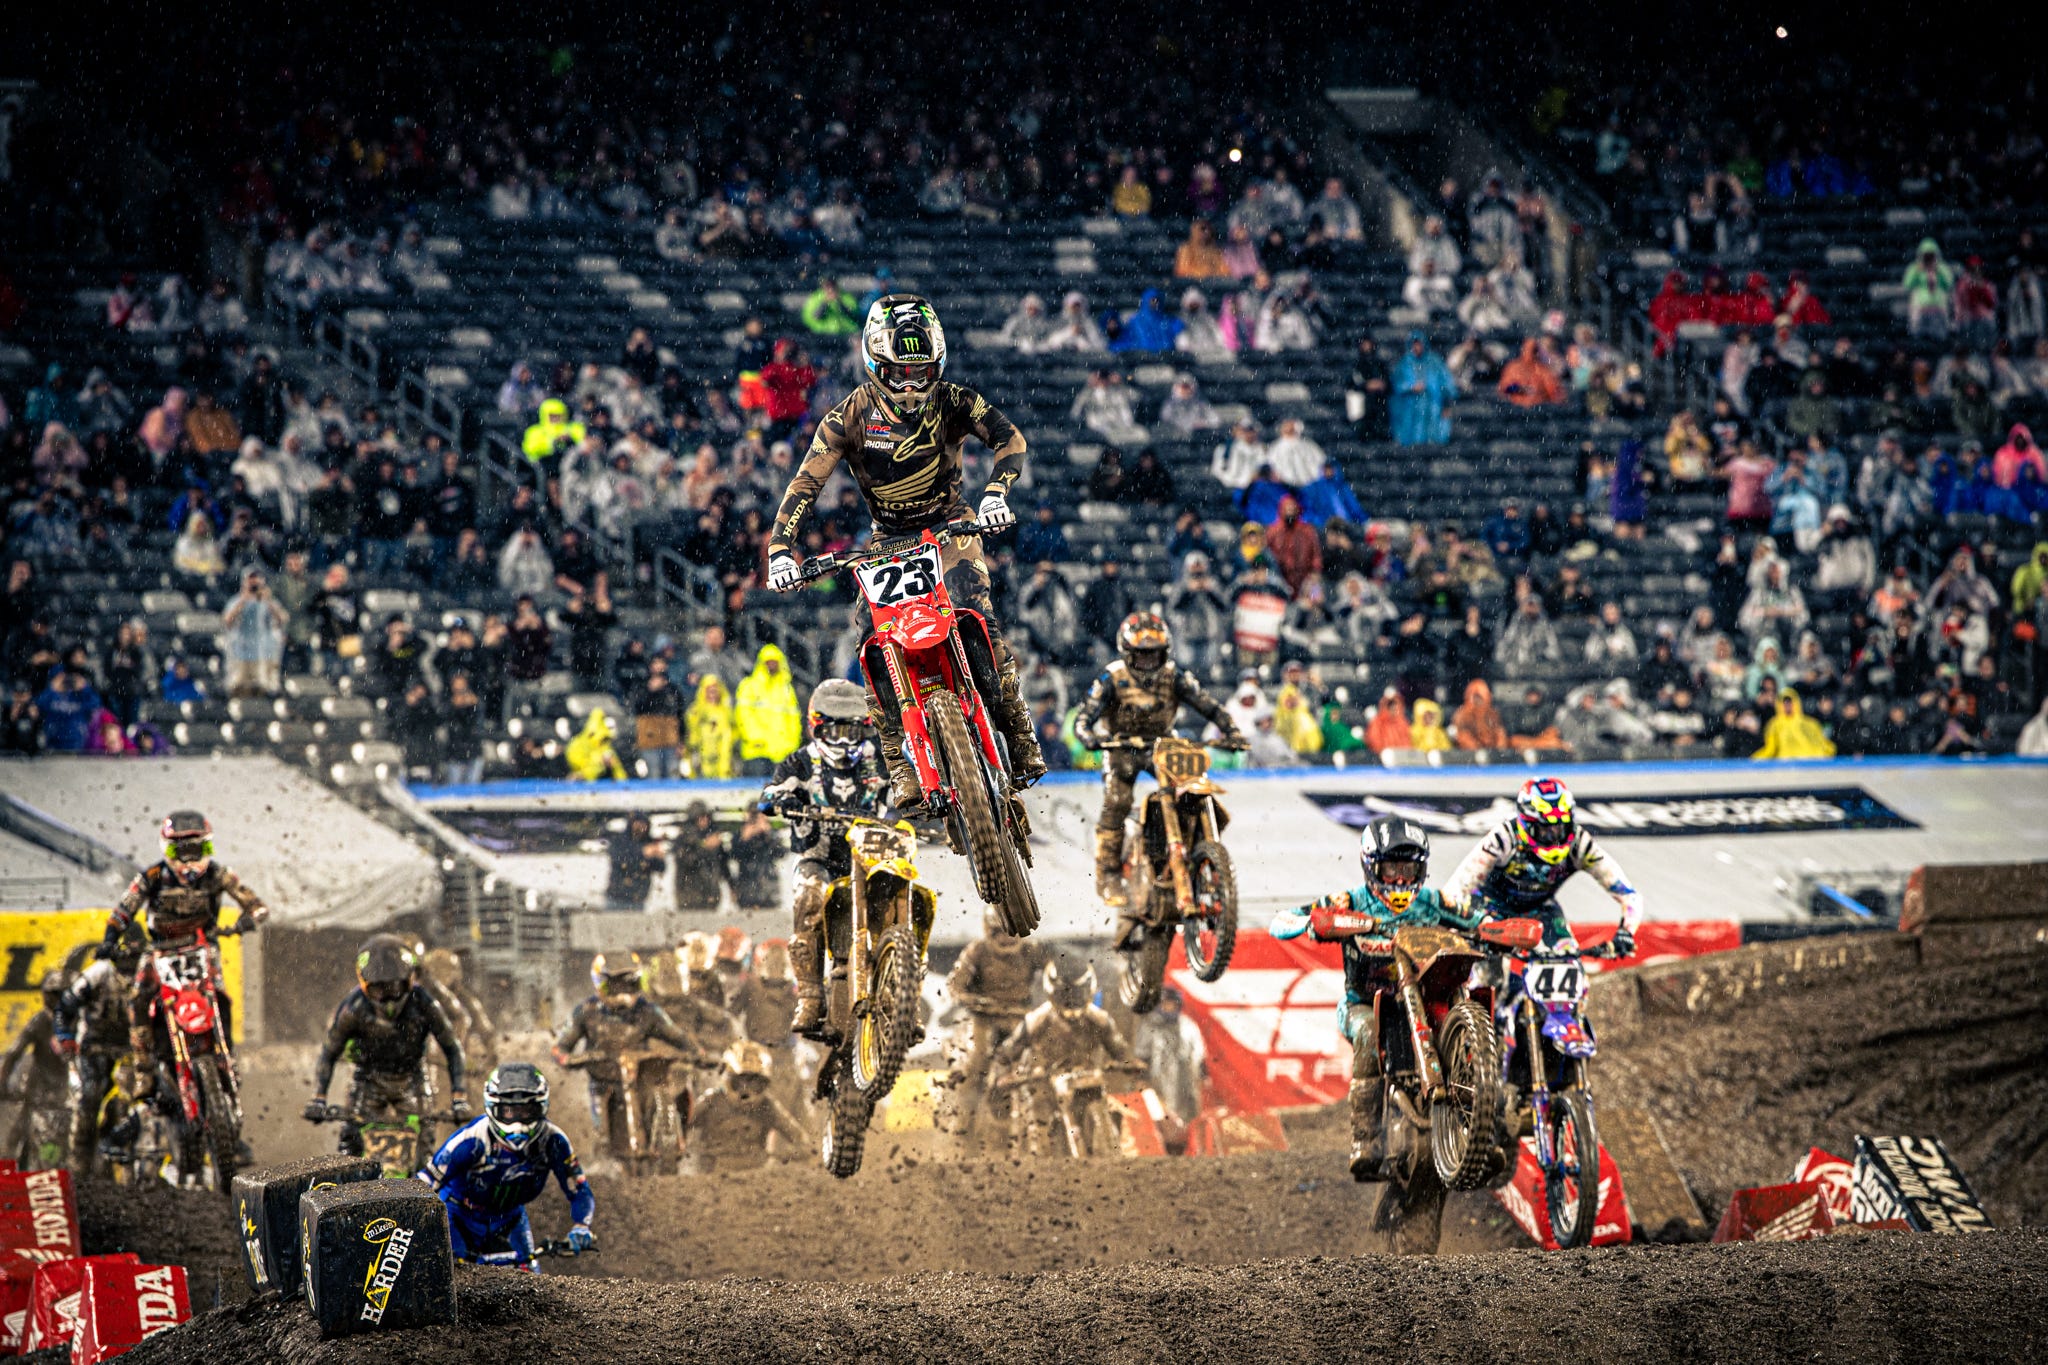 Everything You Need to Know About Supercross, Dirt-Bike Racing Turned Up to 11